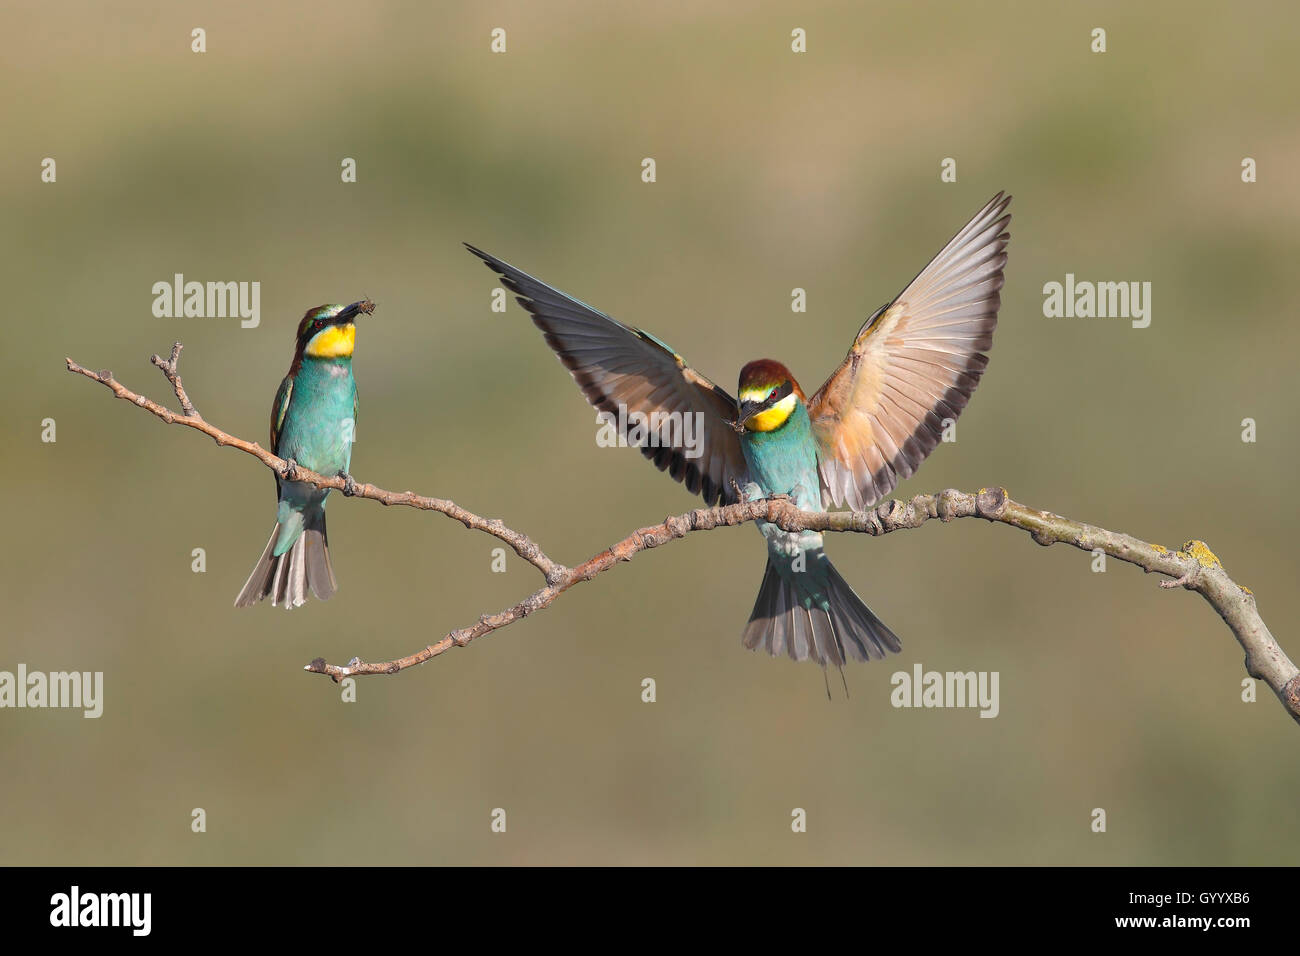 European bee-eater (Merops apiaster), to birds, one sitting on a branch, one in flight, Nickelsdorf, National Park Lake Neusiedl Stock Photo